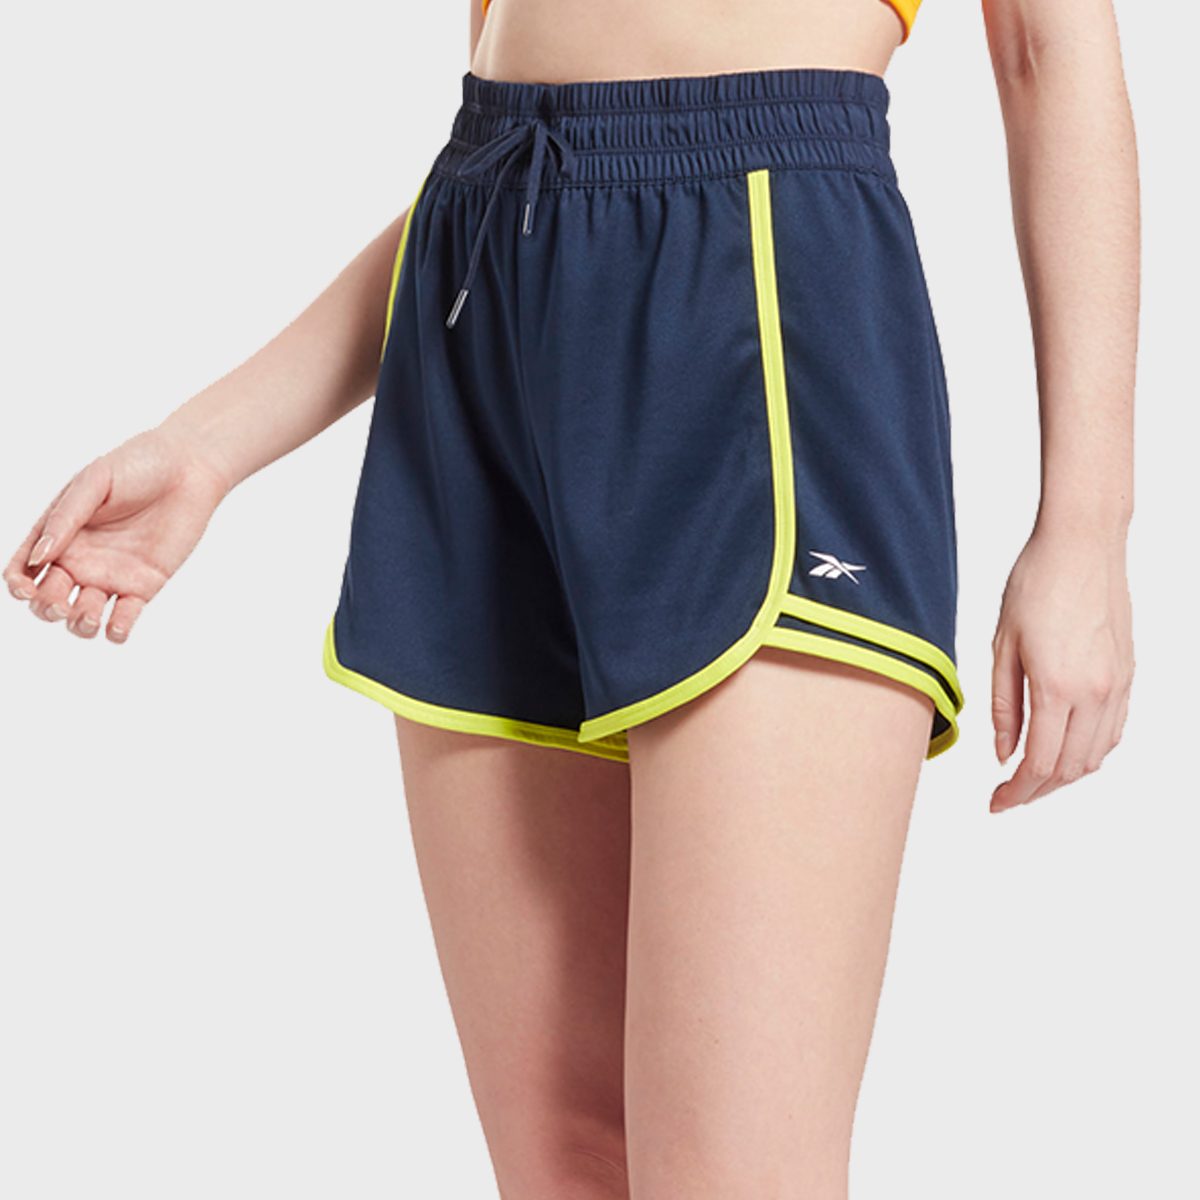 The Best Workout Shorts for Women